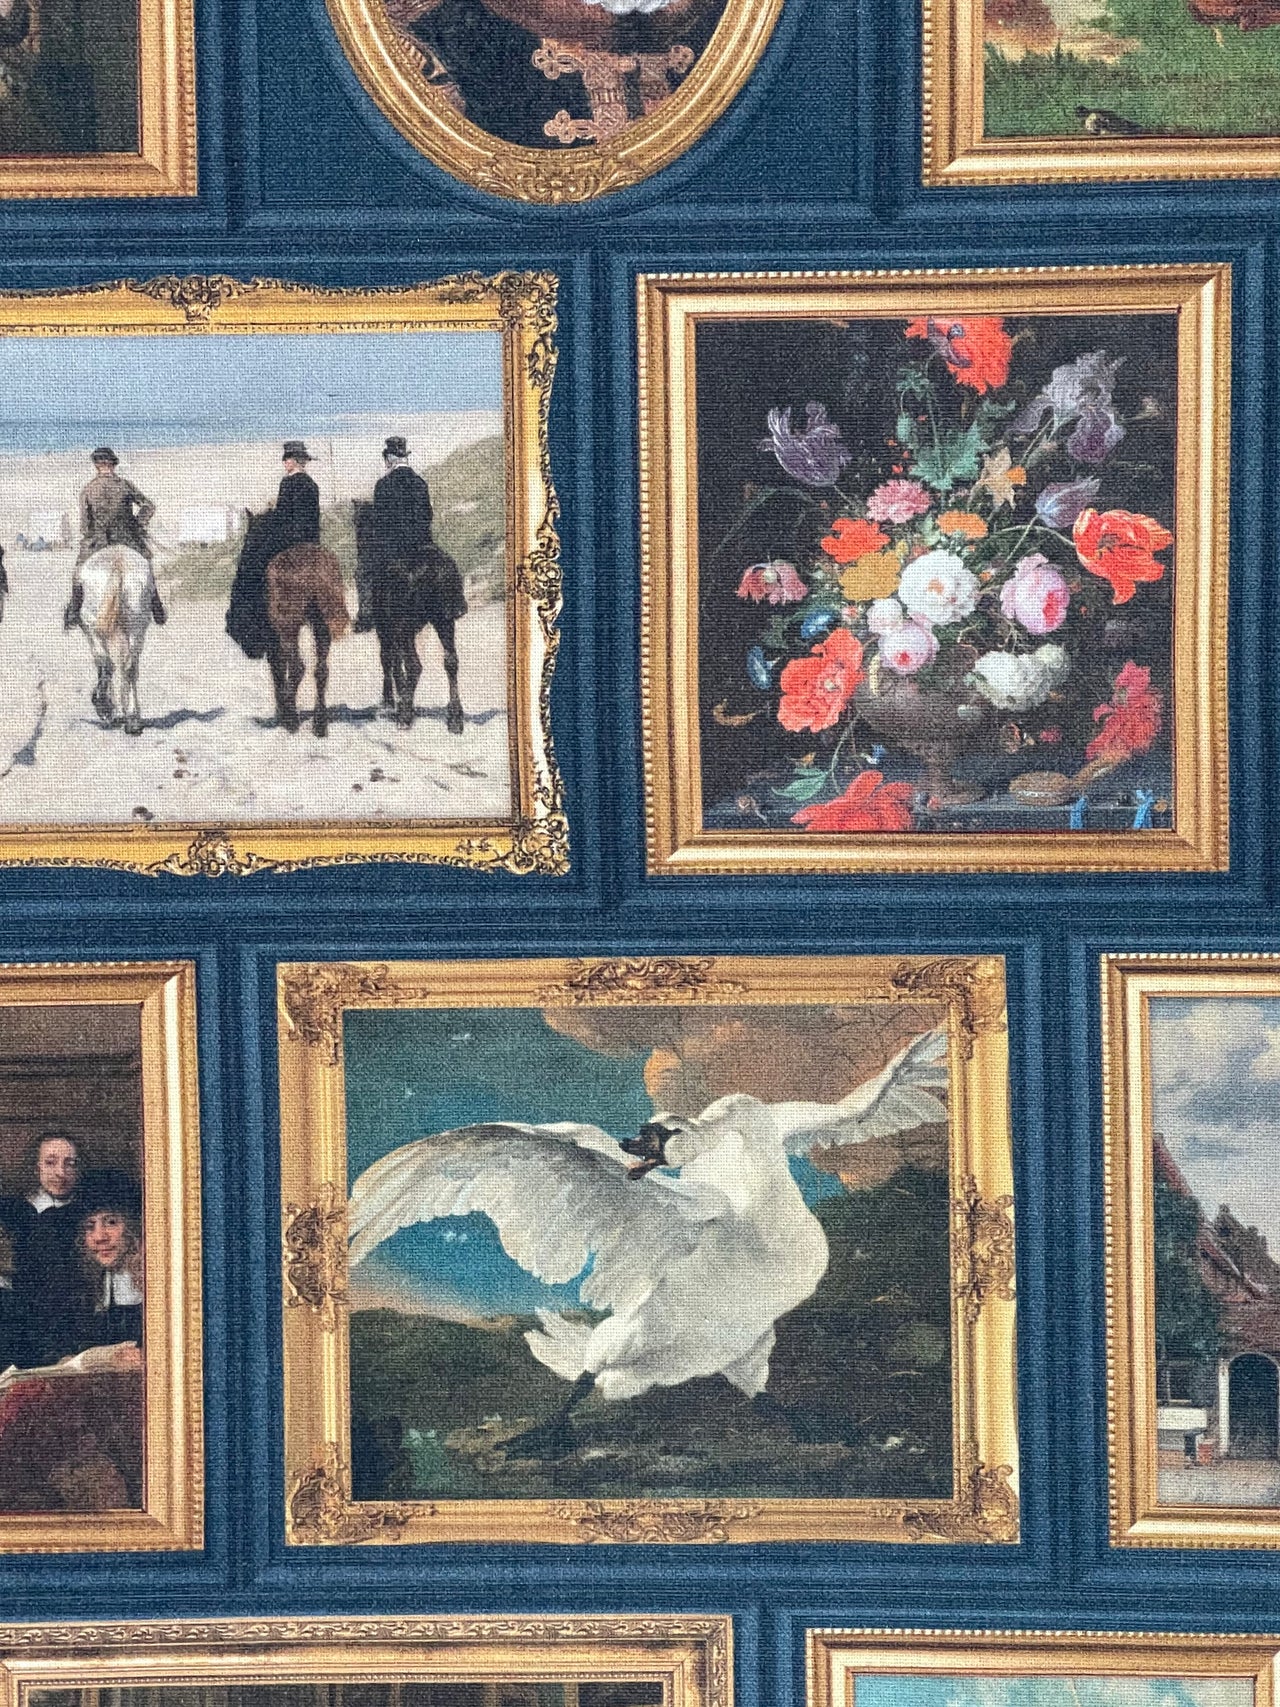 Inspired by Dutch Art: Jan Asselijn's Swan and More on Cotton - Sold by the Meter